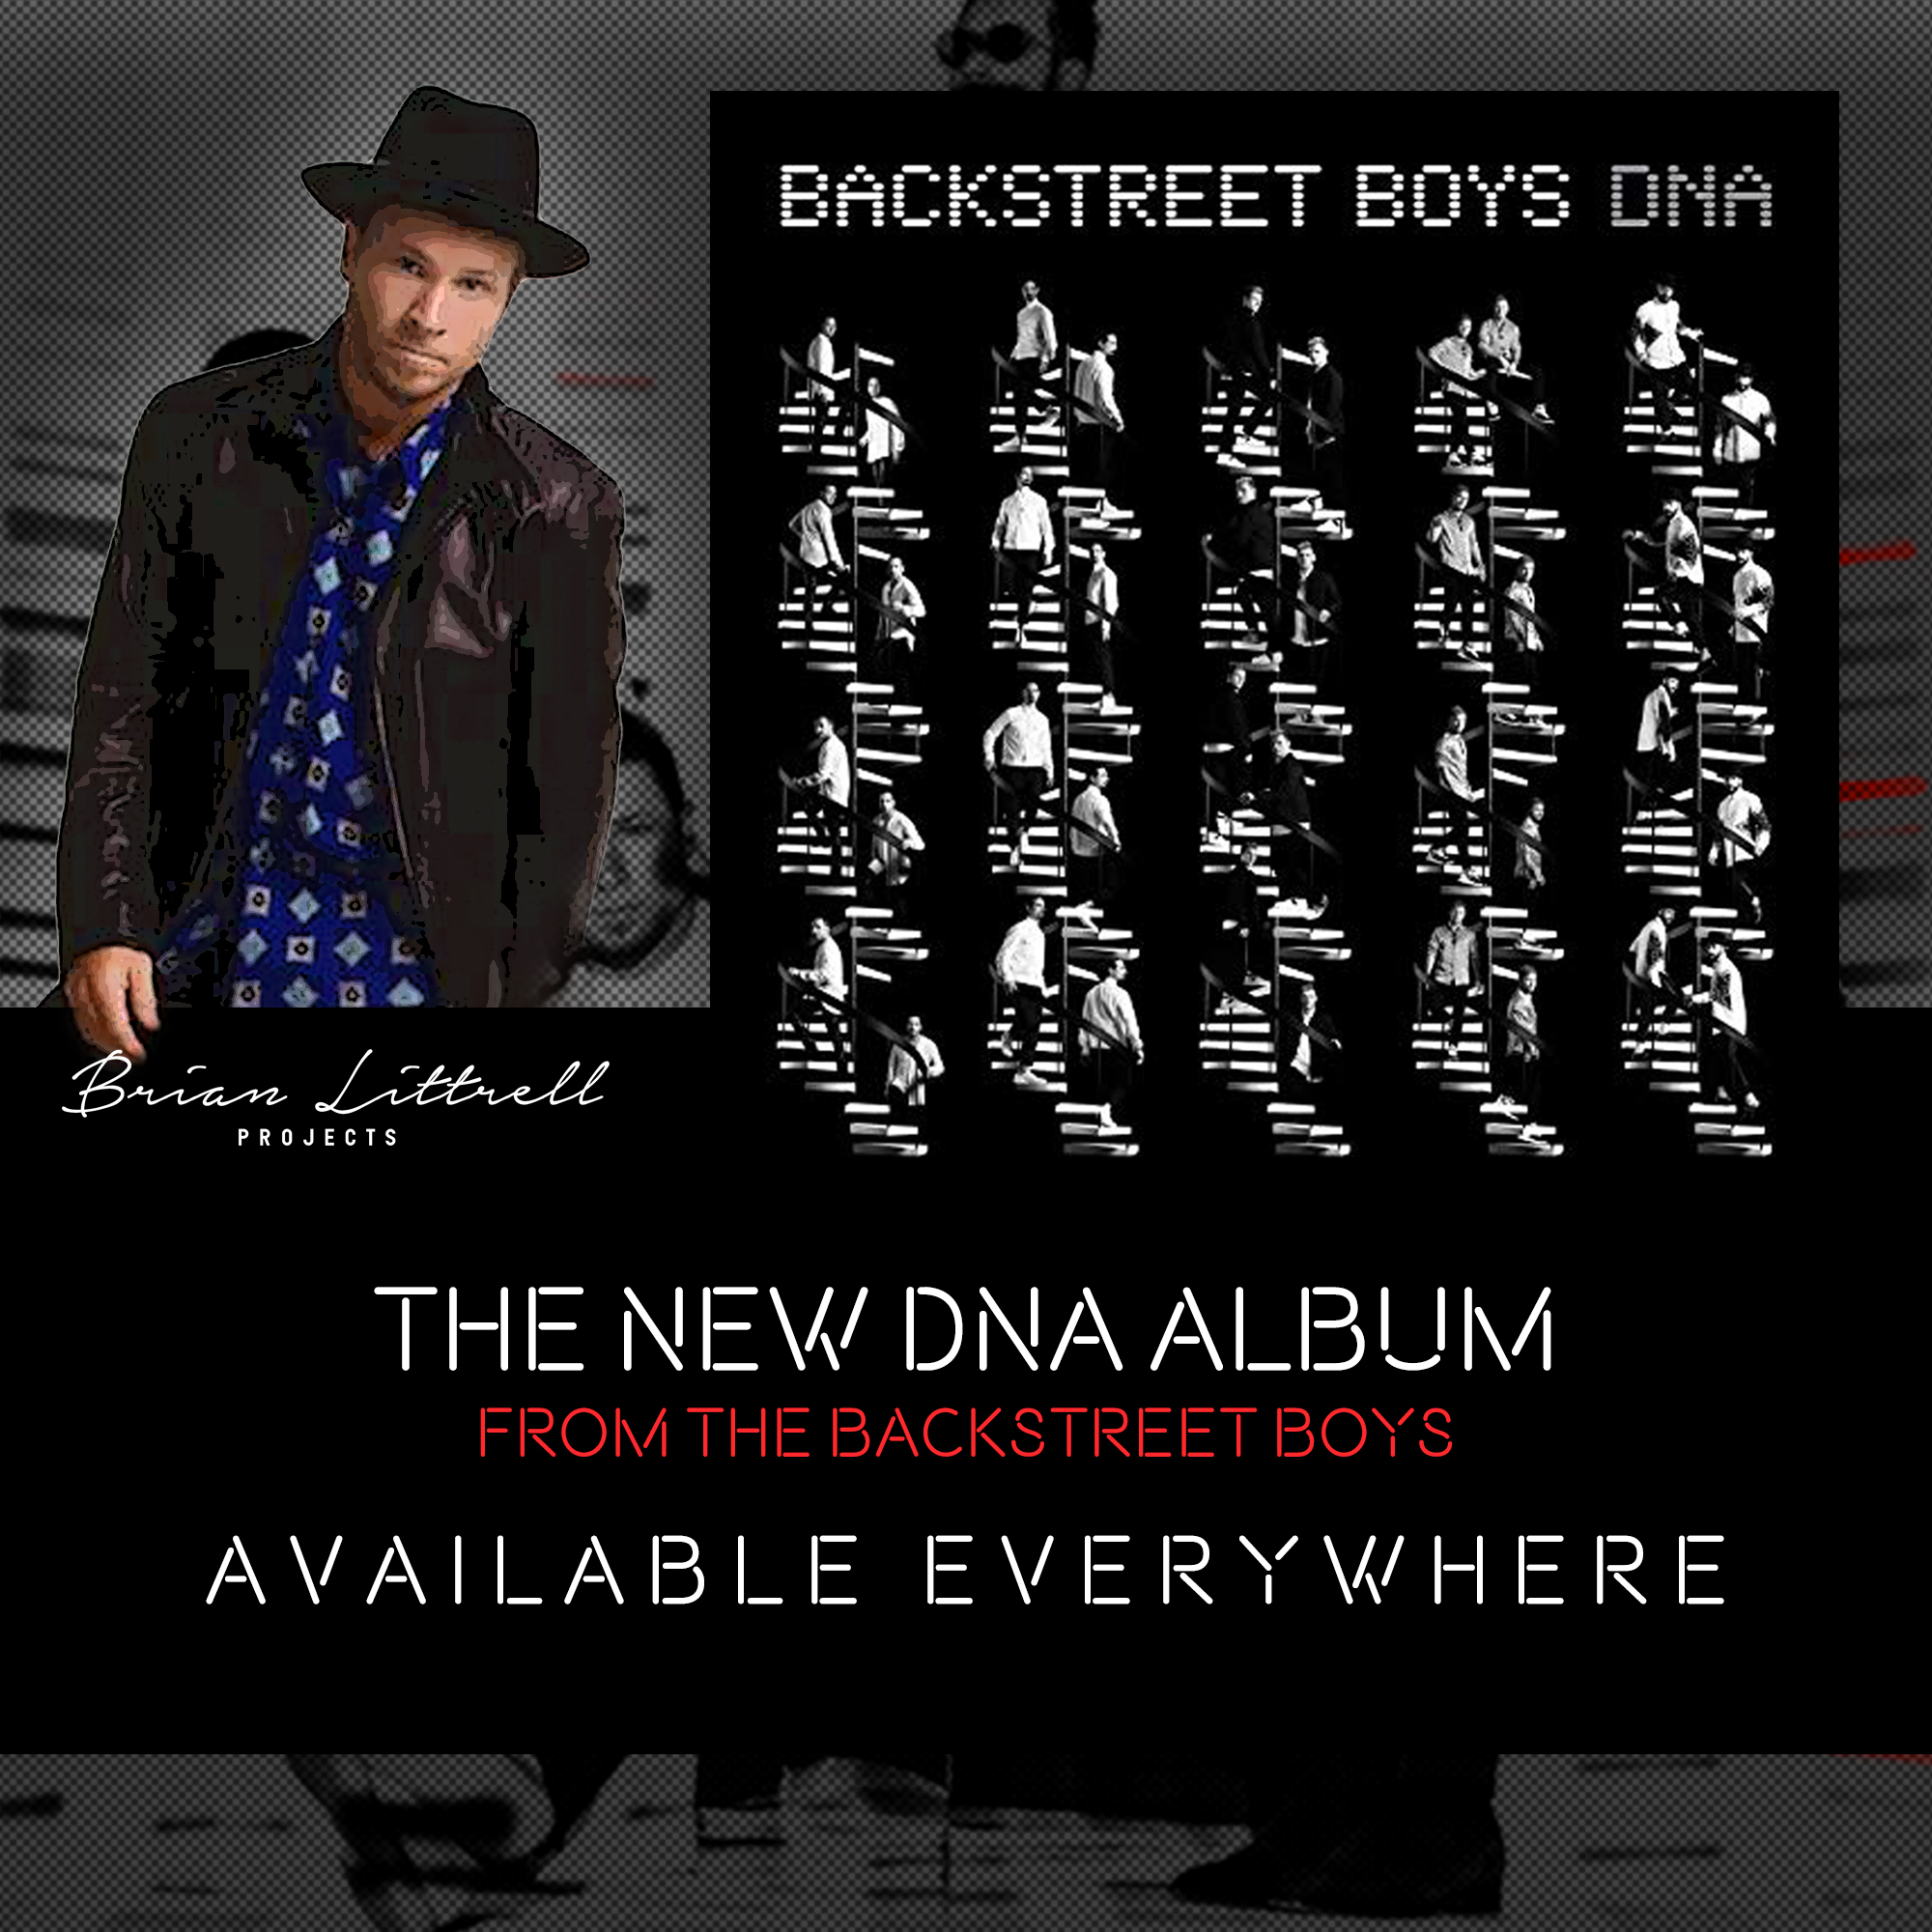 The new #DNA album from the Backstreet Boys available NOW